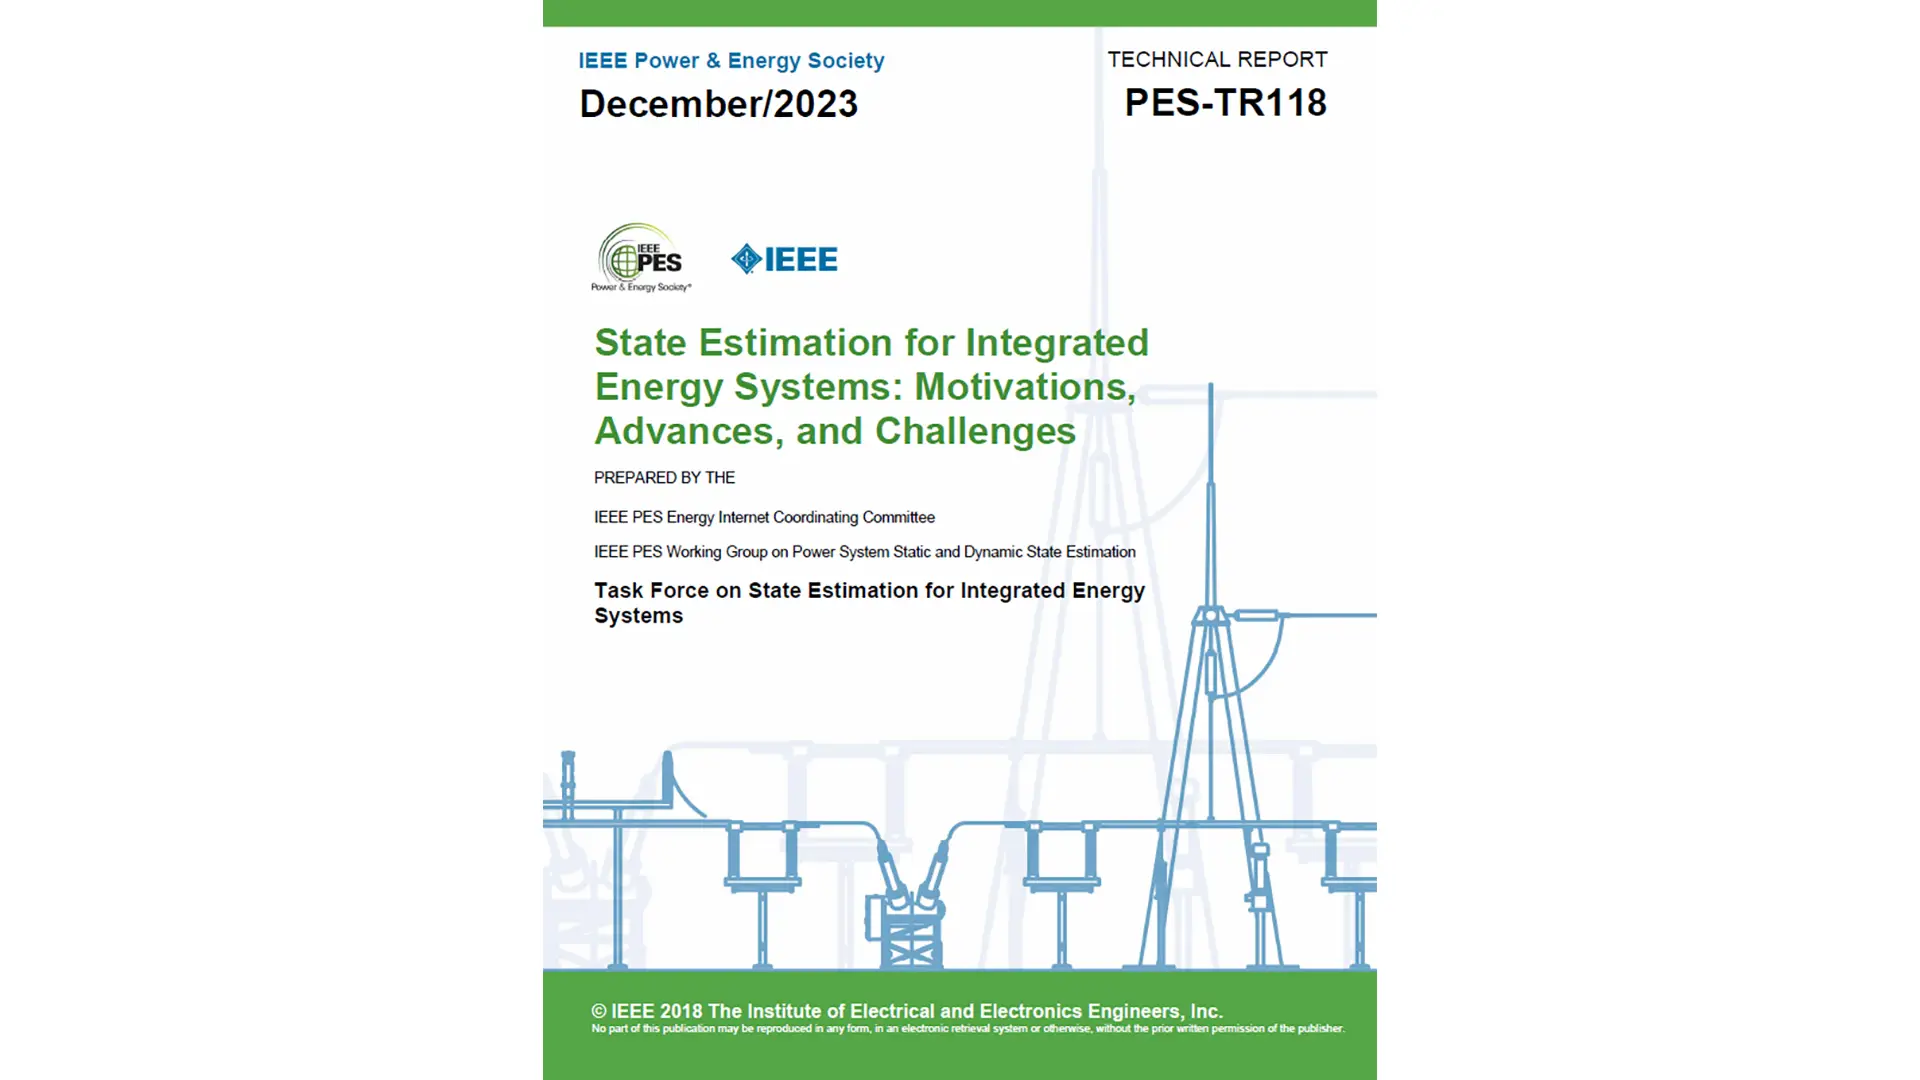 State Estimation for Integrated Energy Systems: Motivations, Advances, and Challenges (TR118)